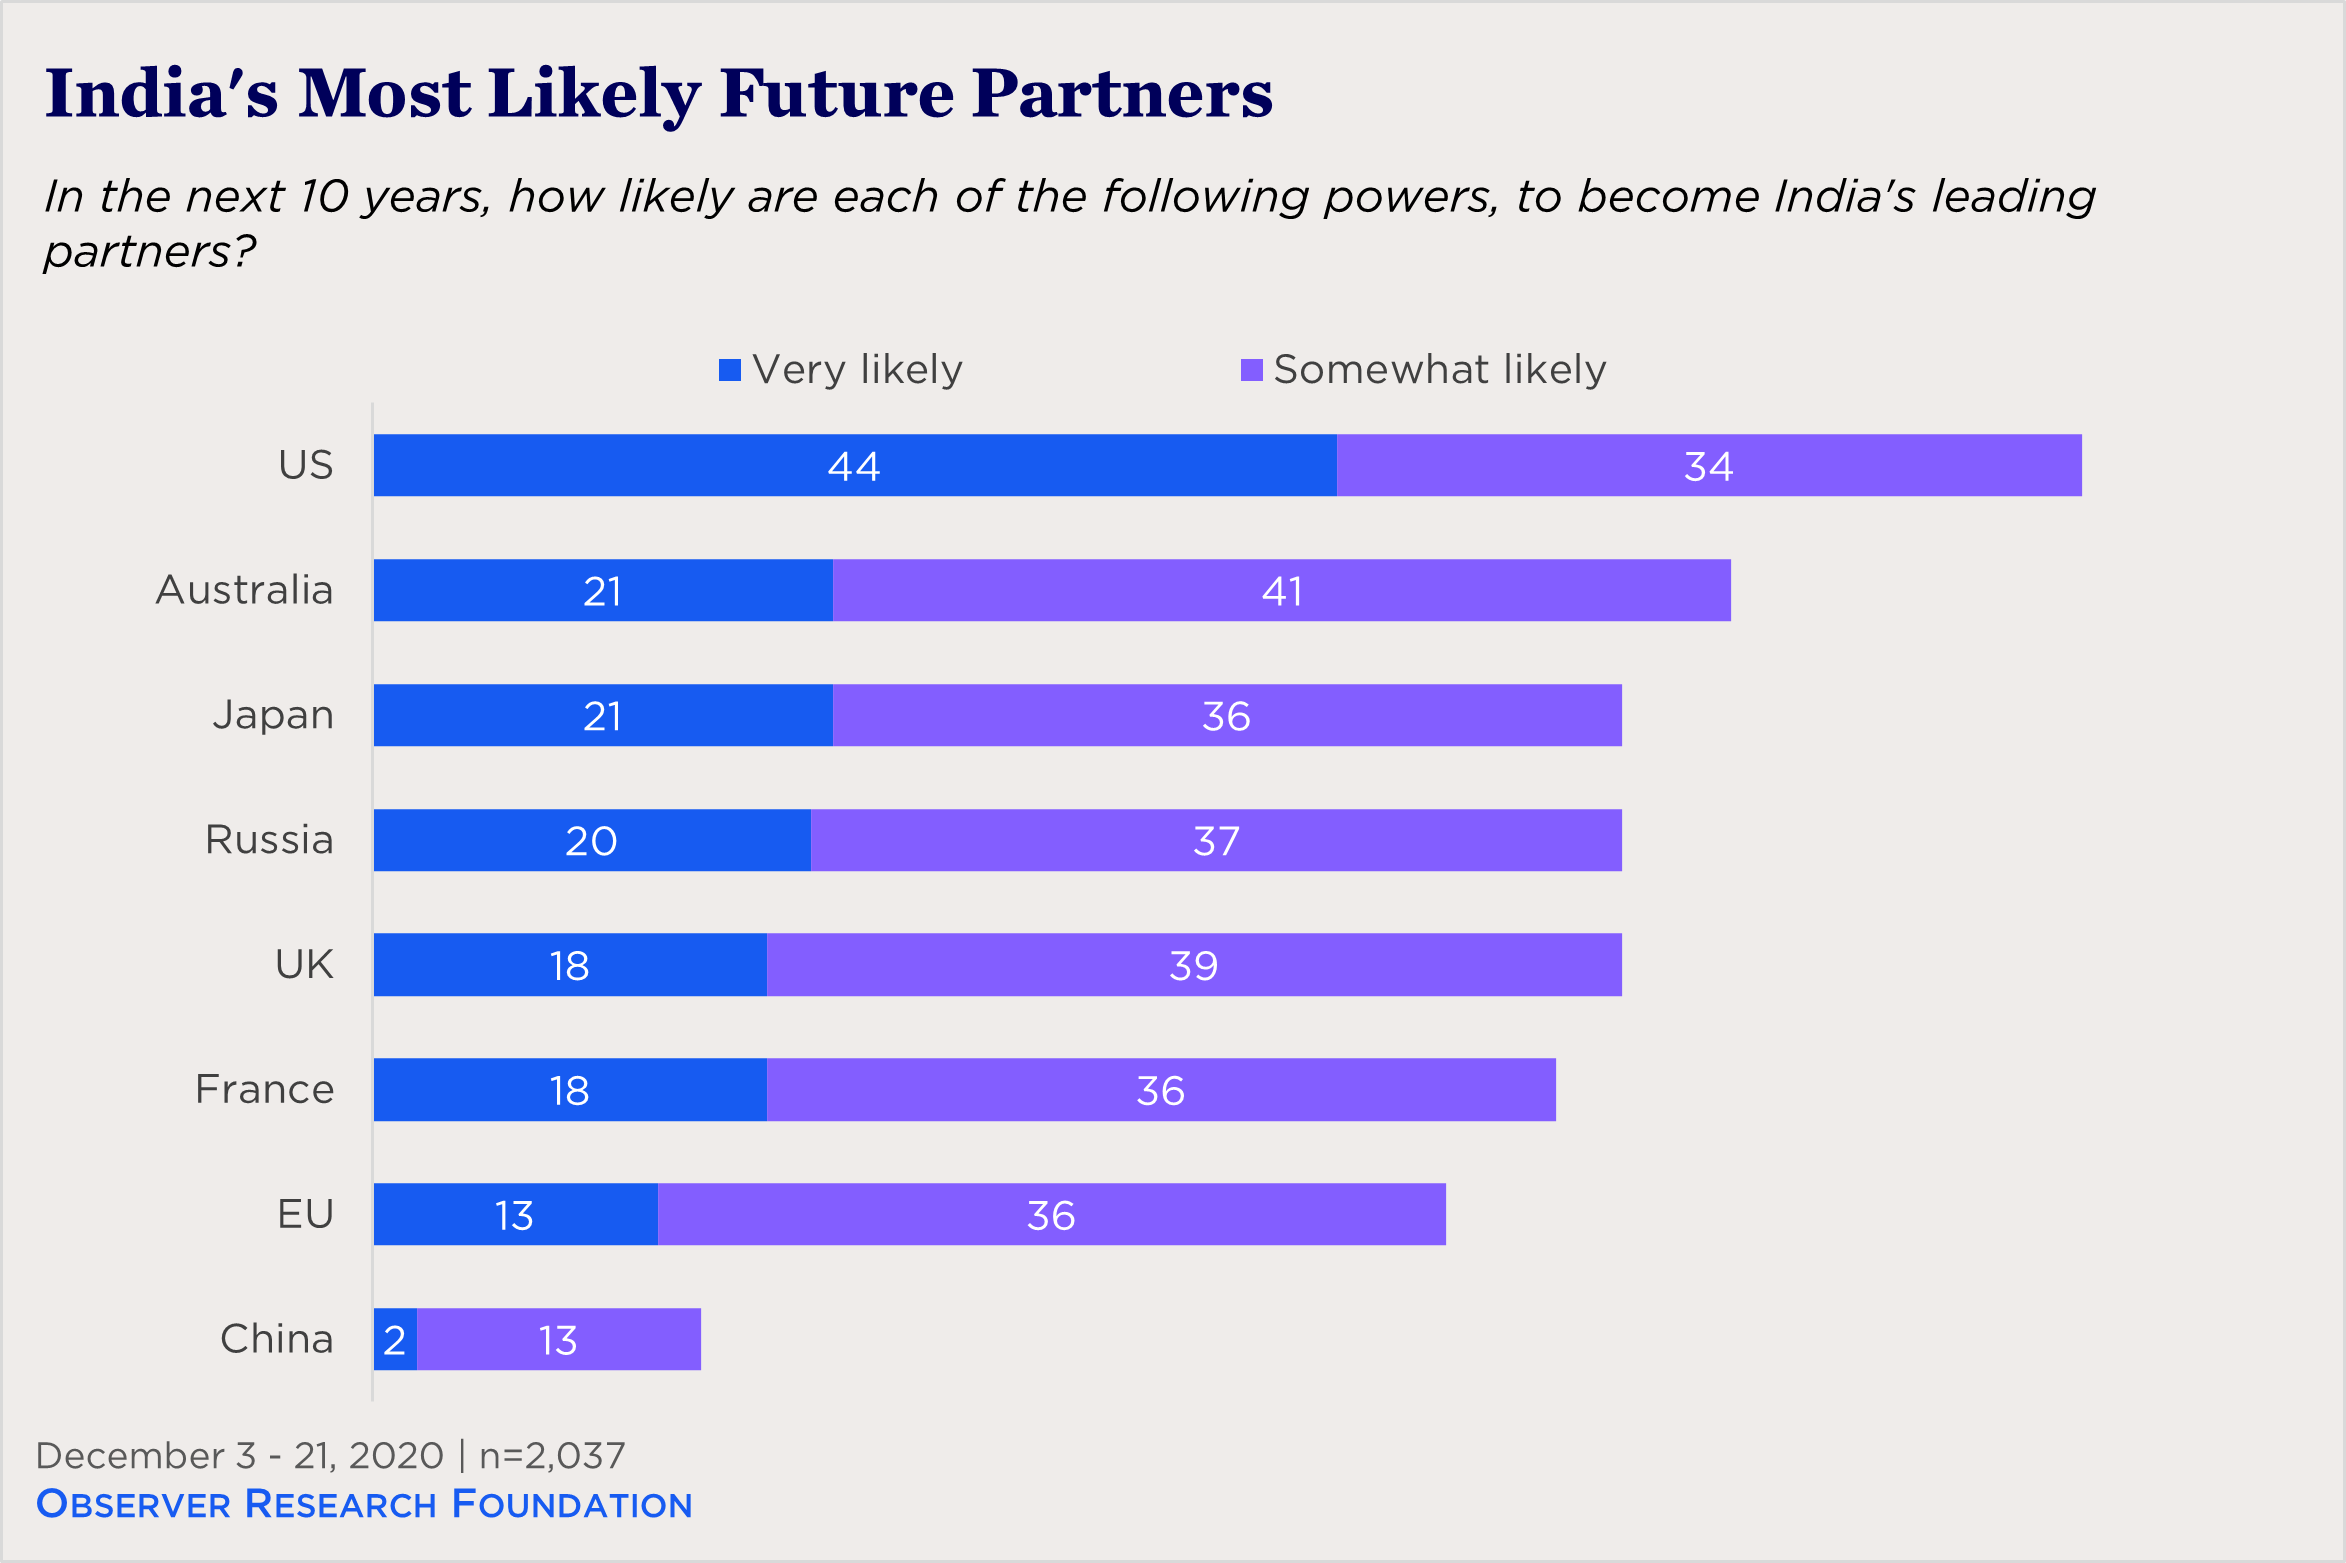 "bar chart showing view of future Indian partners"